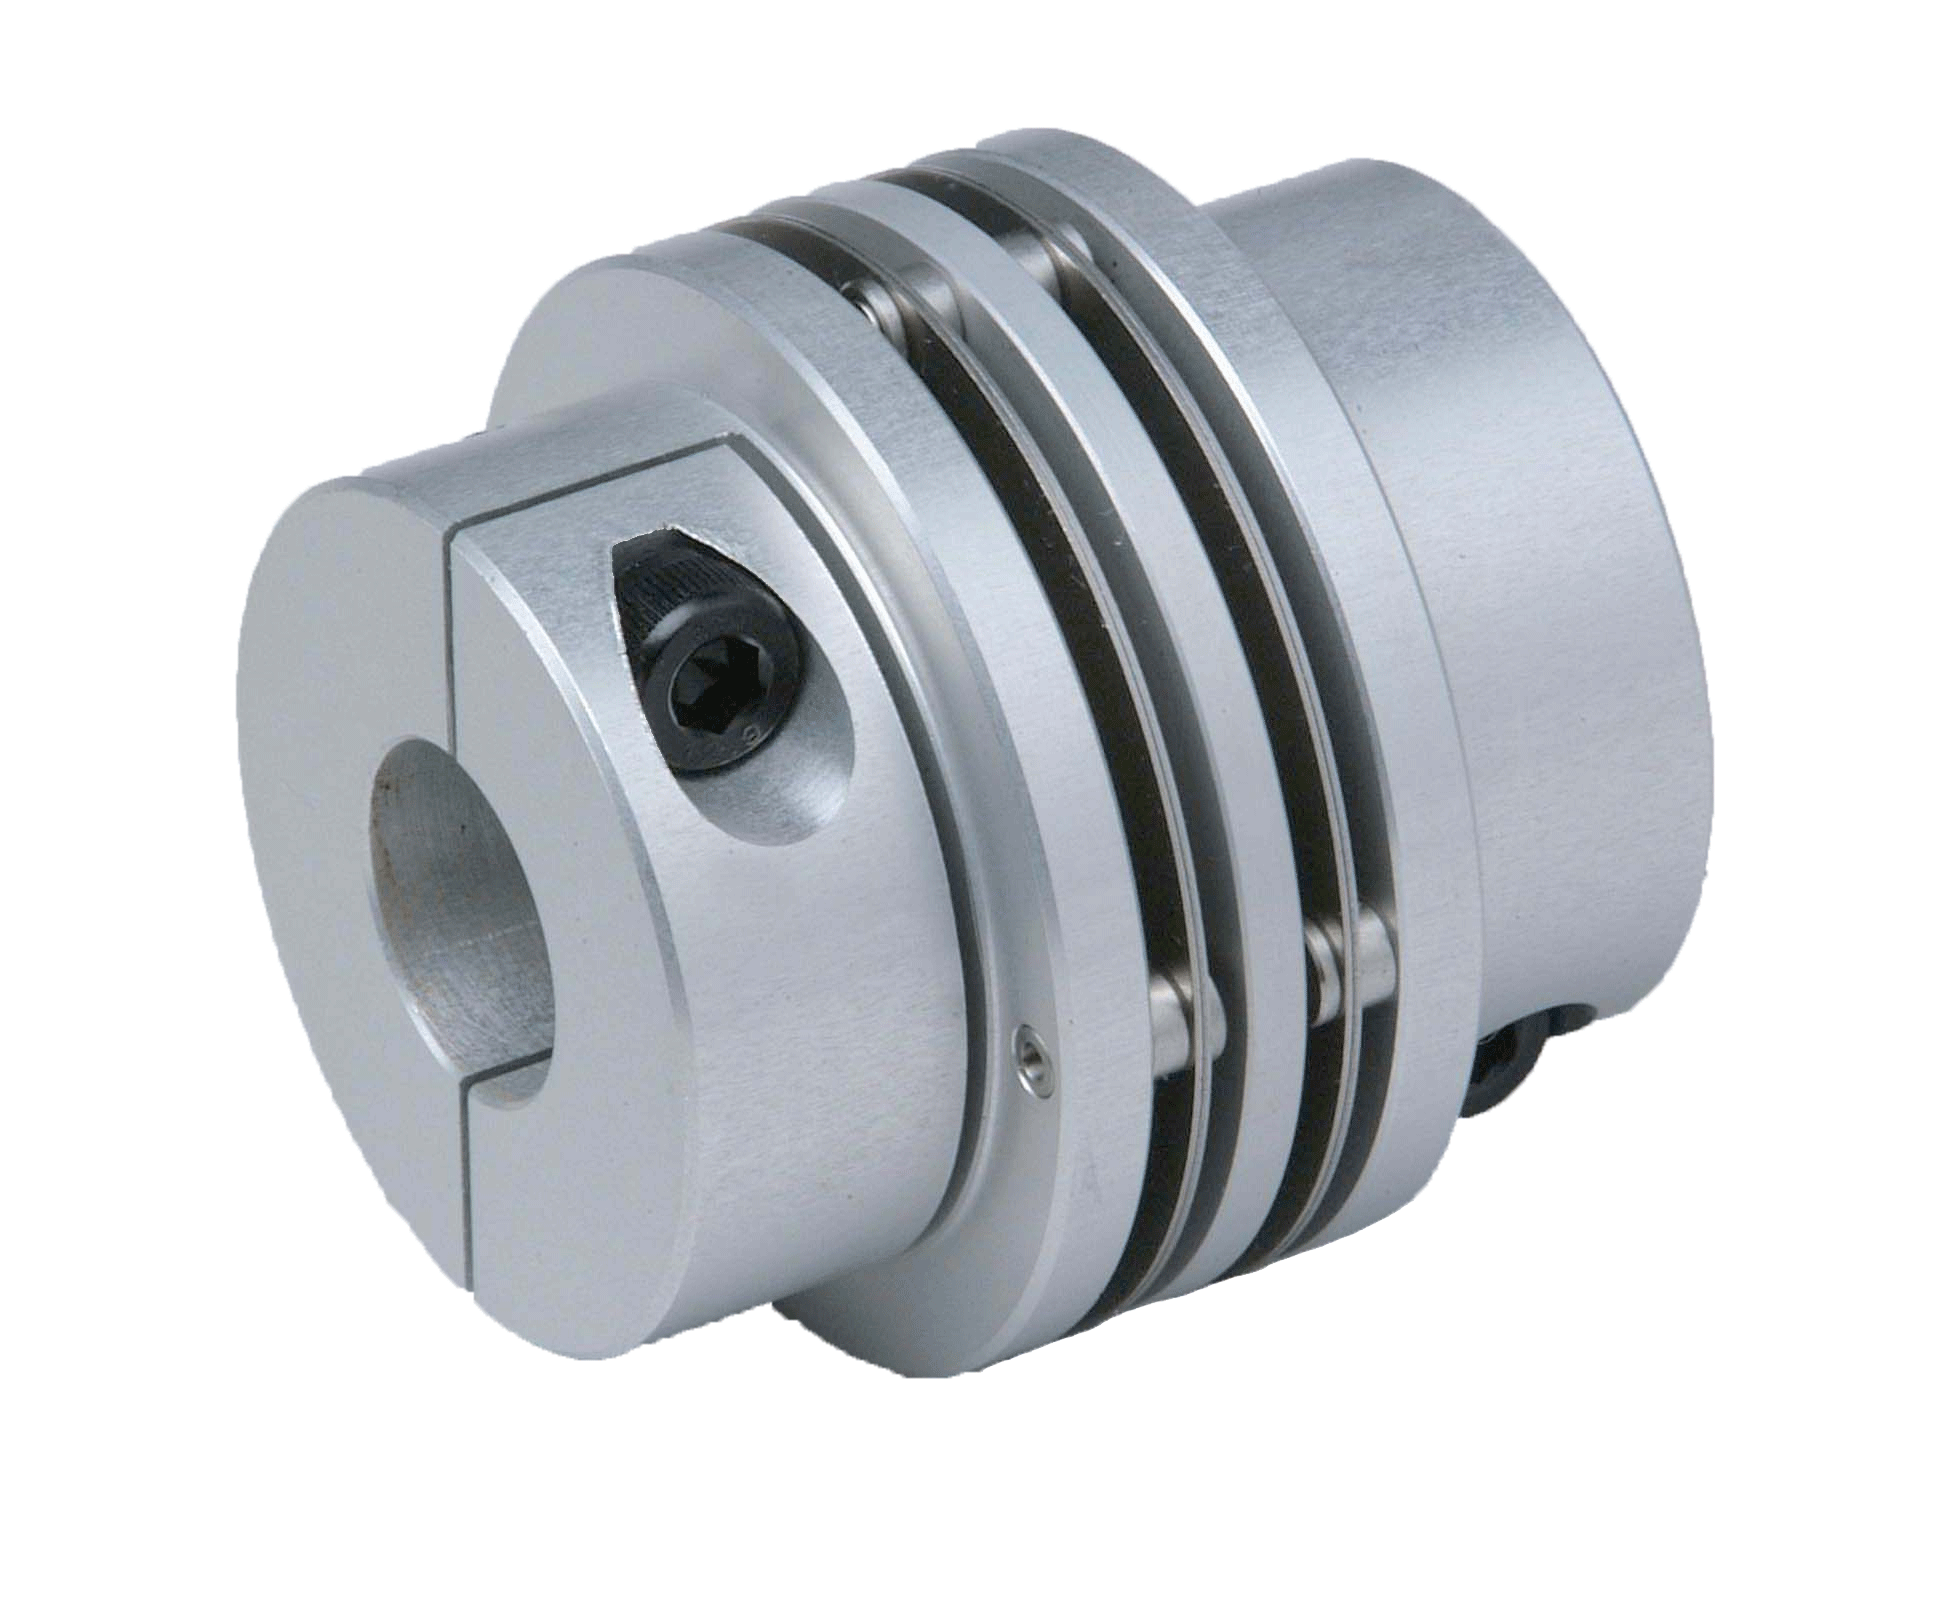 20 mm OD Metric Lovejoy 58607 Size MOL20C Oldham Coupling Hub Aluminum 4 mm Bore No Keyway 33 mm Overall Coupling Length 1.198 Nm Nominal Torque